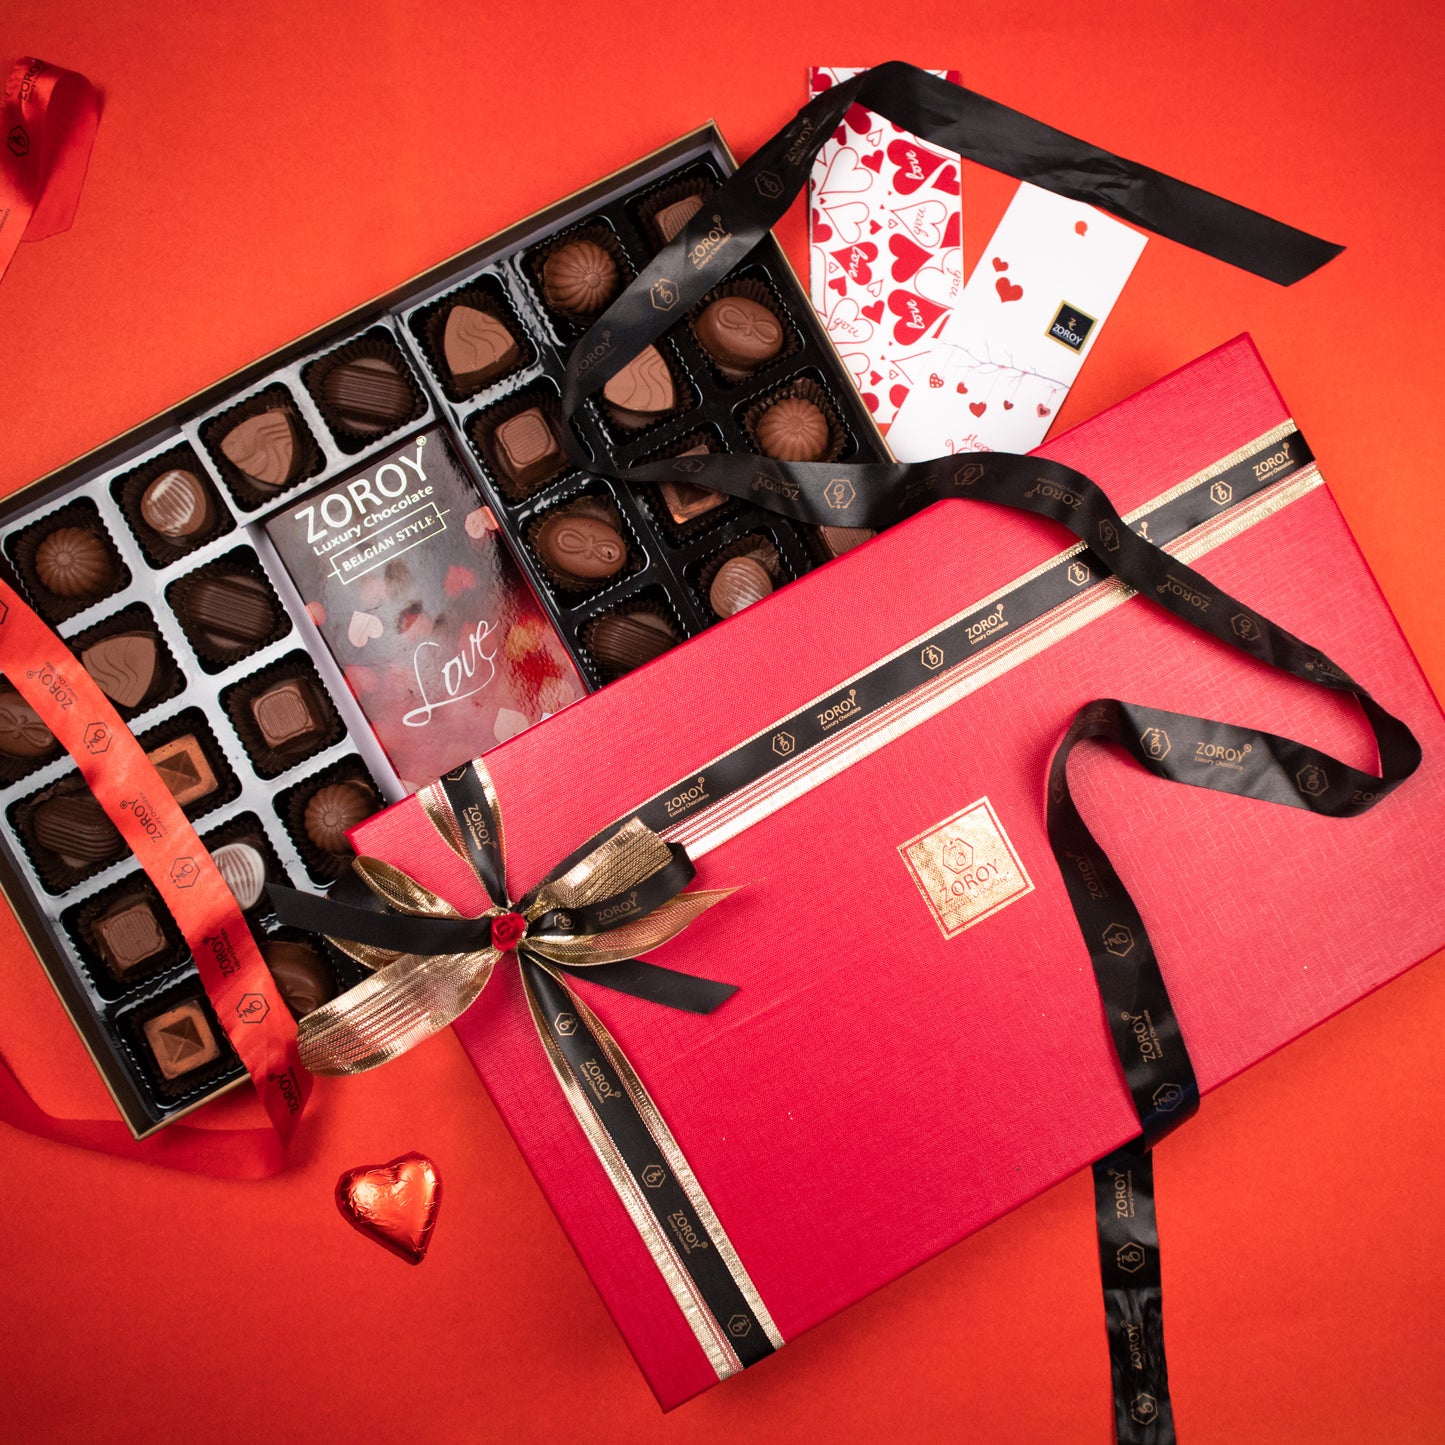 ZOROY Love Extravaganza with 30 assorted chocolates and a Happy Valentine's Day Bar of 100gm milk chocolate